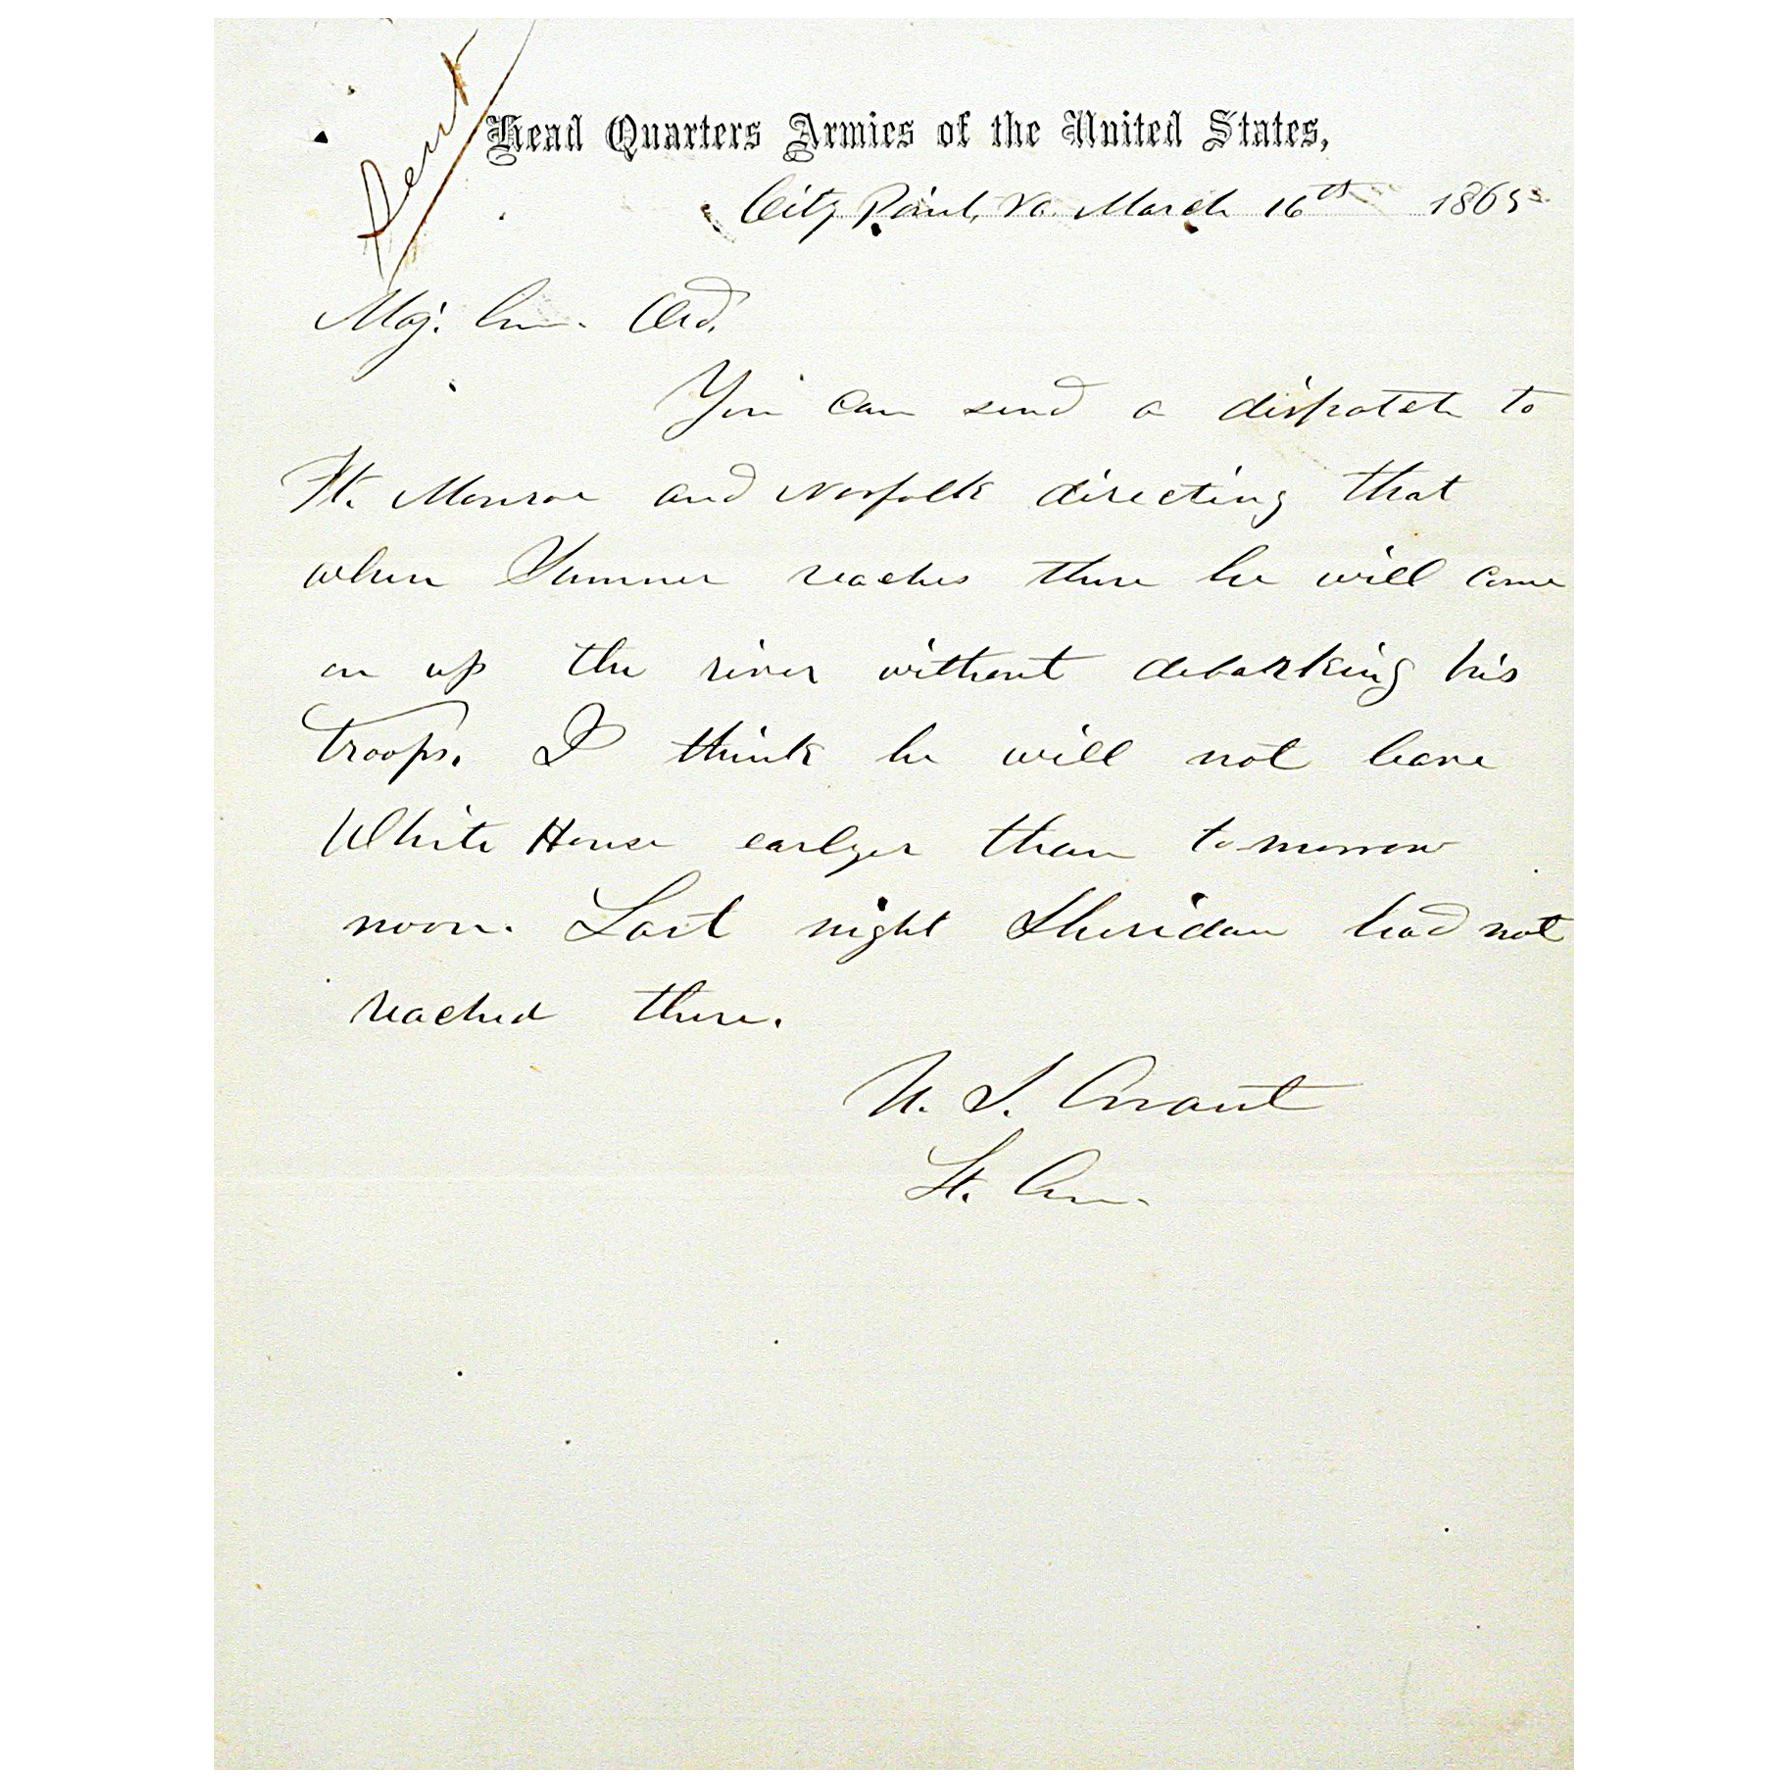 Ulysses S. Grant - Autograph Letter Signed Directing Generals for the War's End